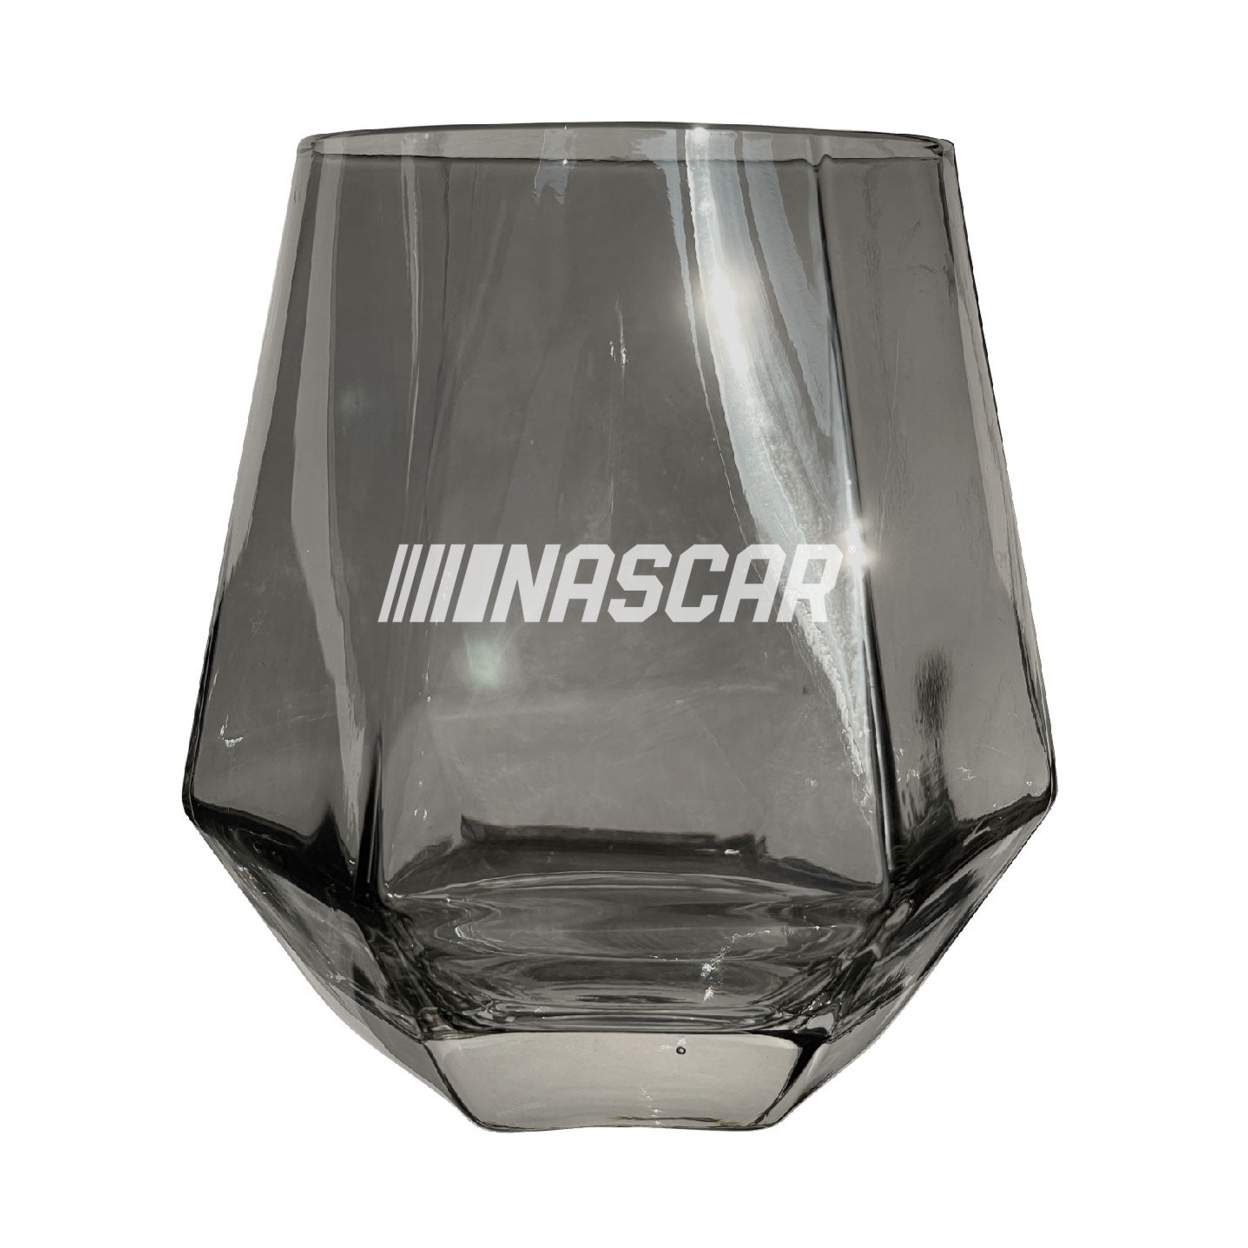 NASCAR Officially Licensed 10 Oz Engraved Diamond Wine Glass - Grey, 2-Pack